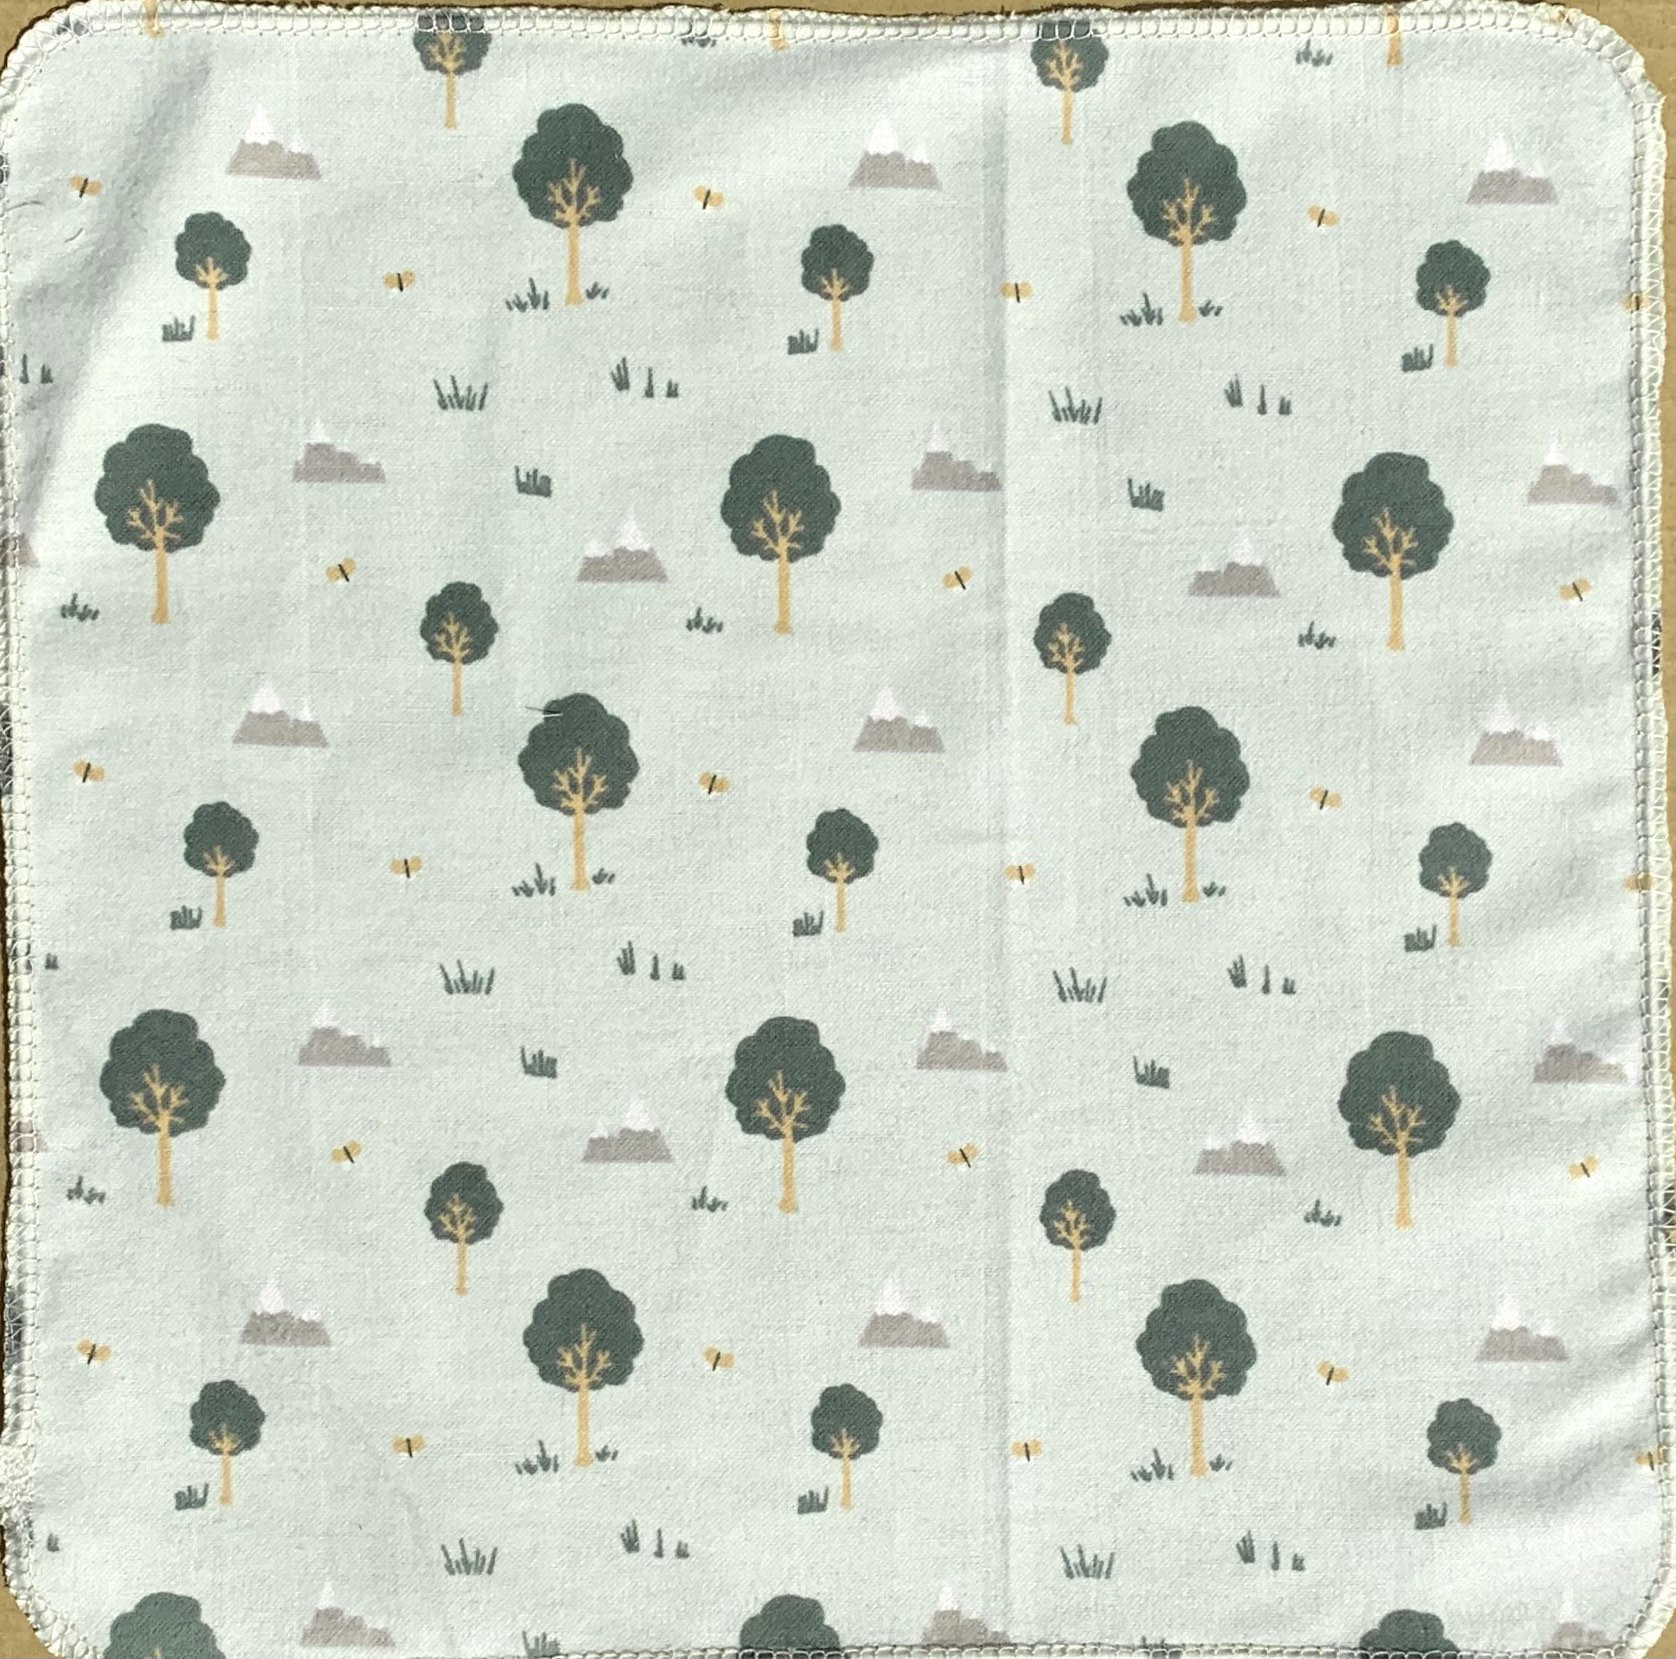 Woodland Trees Paperless Towels || Roll of 12 Unpaper Towels || Eco Re-useable || Cloth Napkins